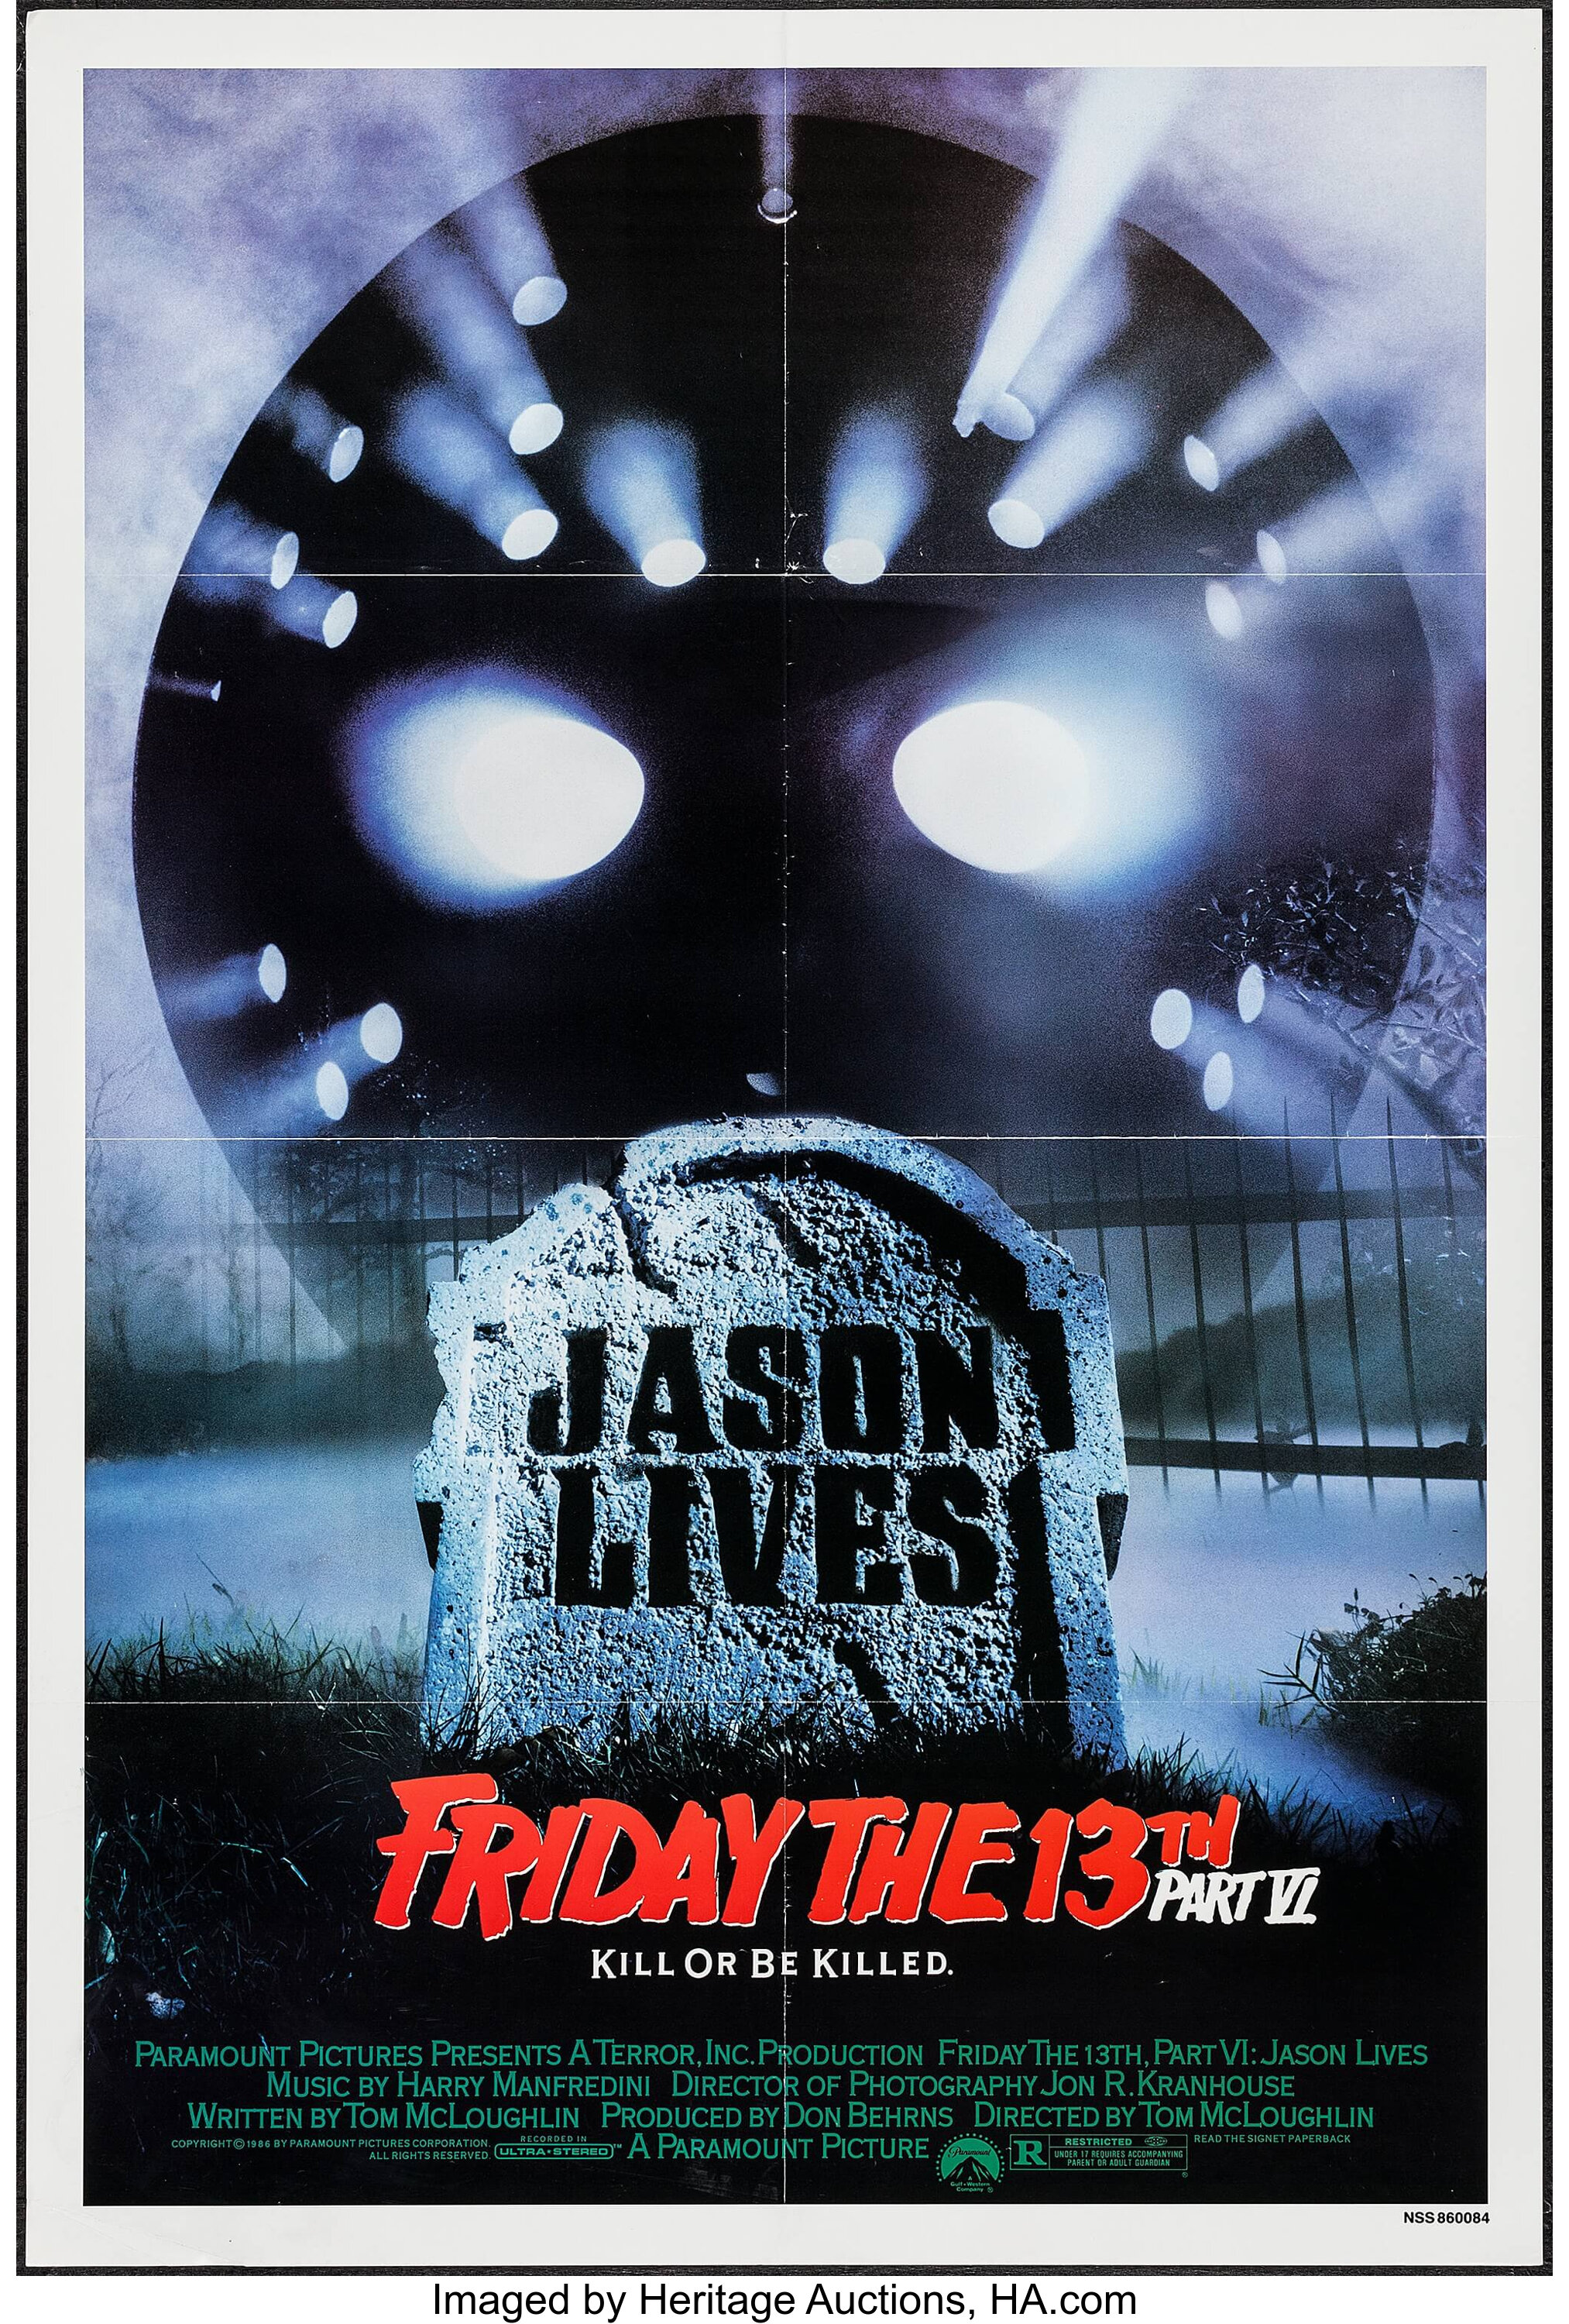 friday the 13th part 6 poster